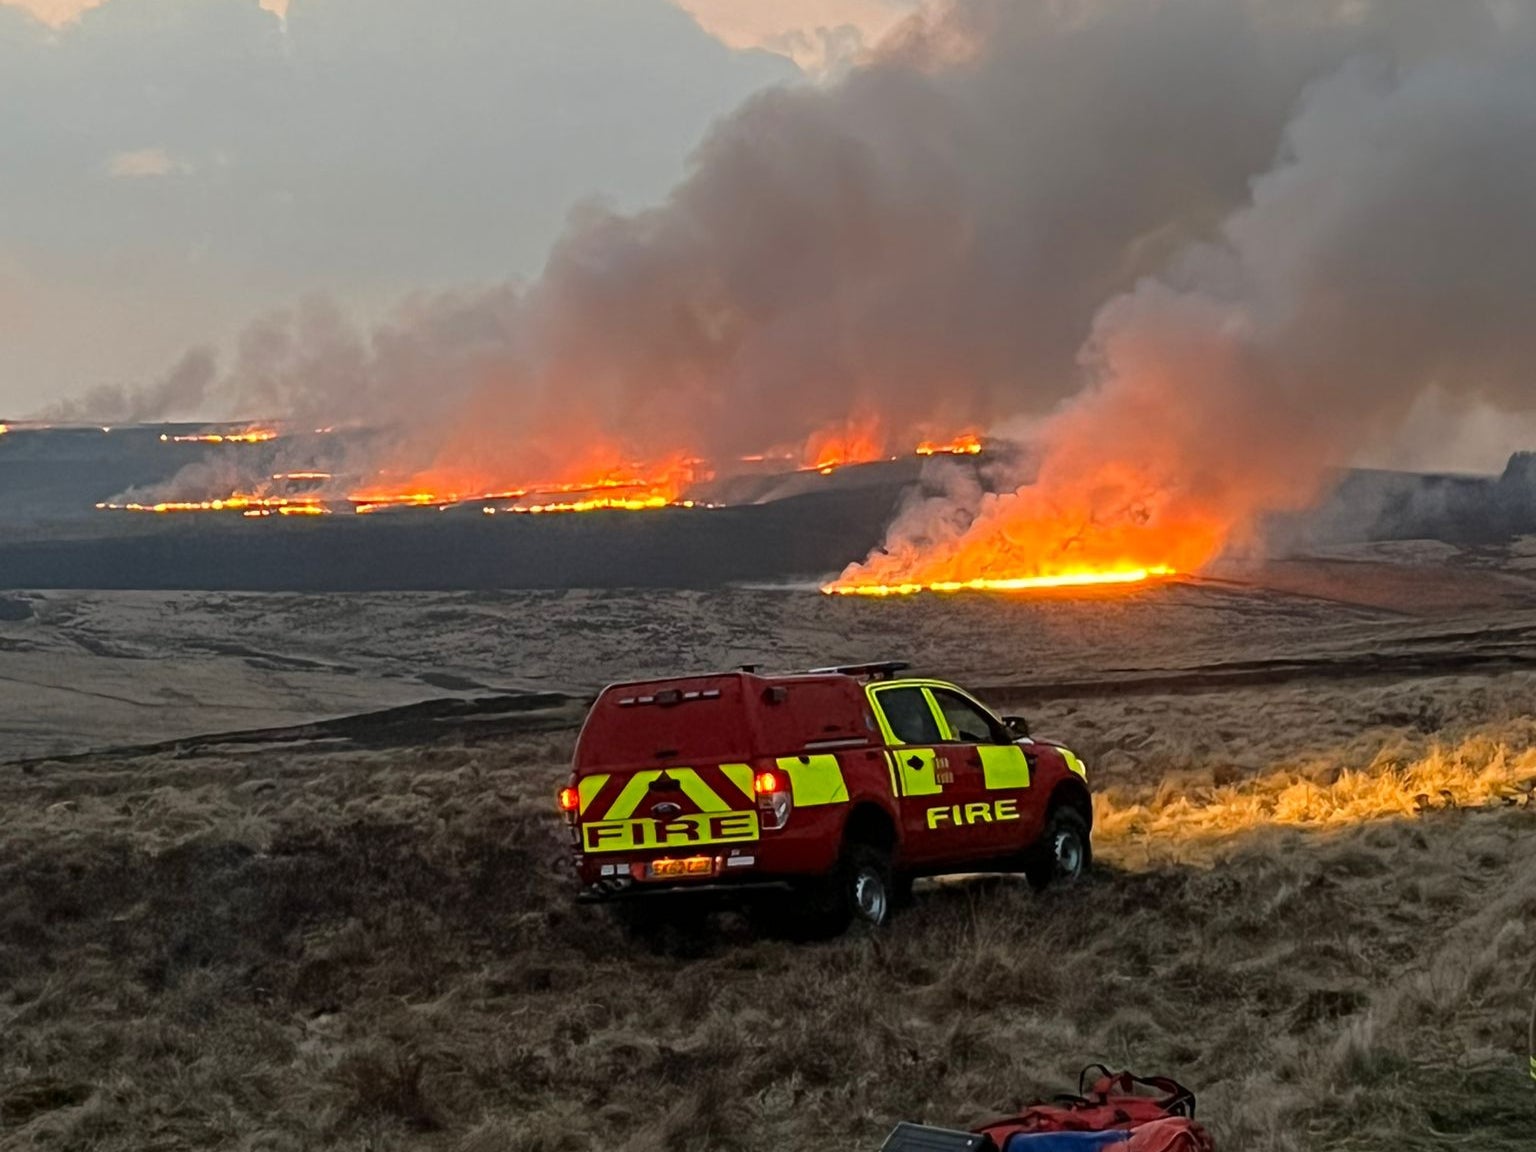 A wildfire in Northumberland National Park and Kielder forest burnt approximately 139 hectares